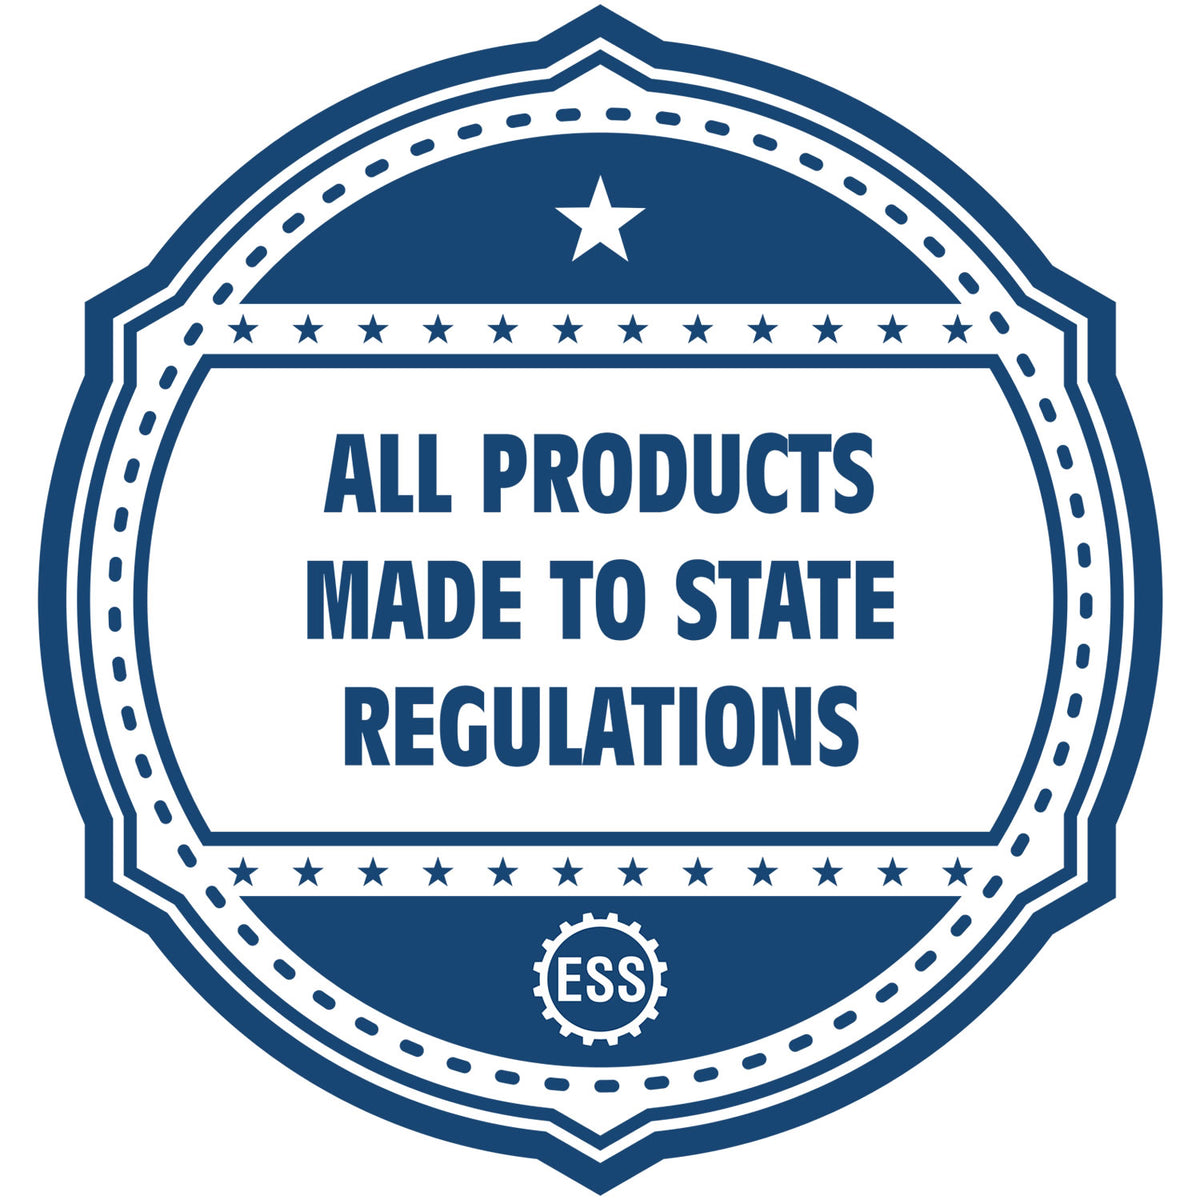 A blue icon or badge for the Hybrid Utah Engineer Seal showing that this product is made in compliance with state regulations.